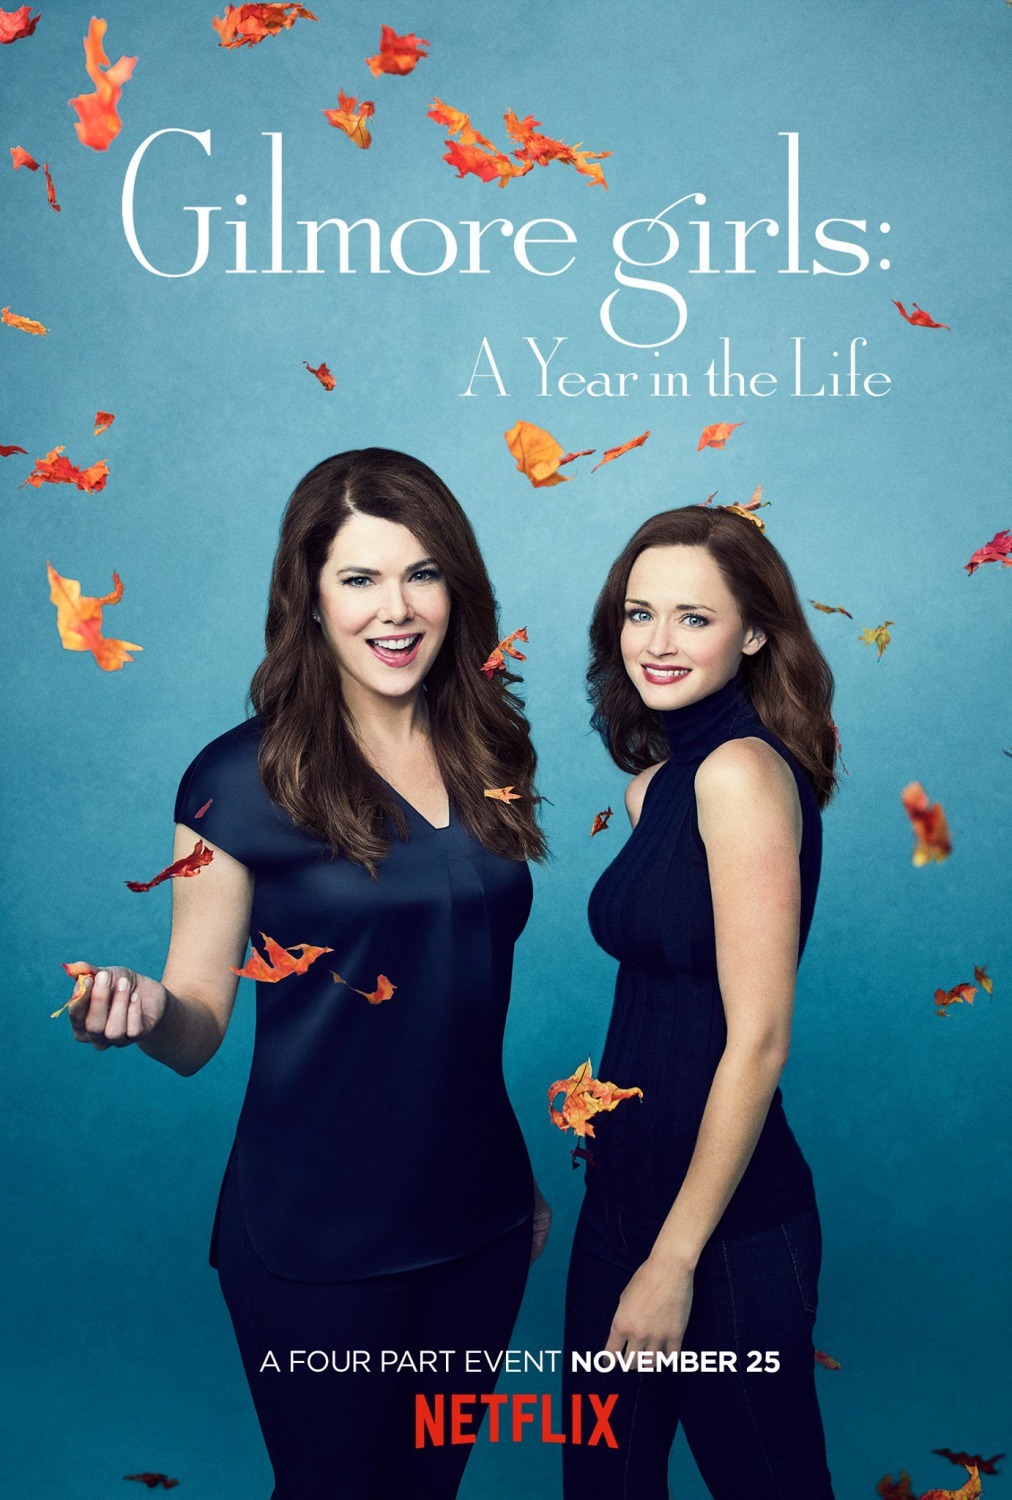 Gilmore girls: A year in the life (Pic credit: IMDb)